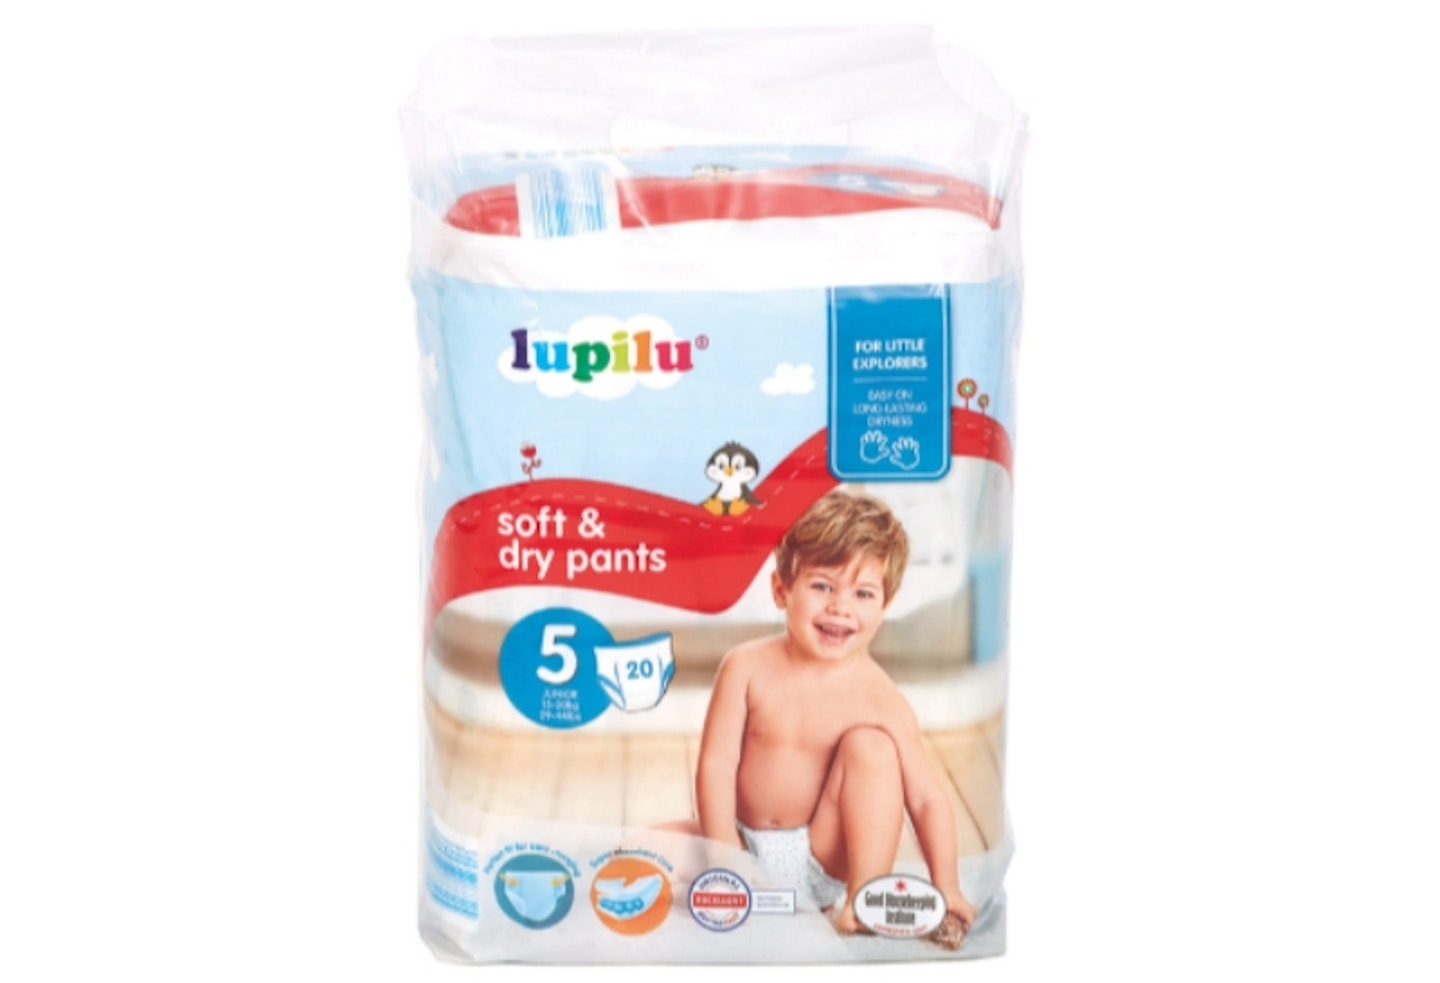 Lupilu Size 6 Extra Large Baby Pants 32 PACK big pack